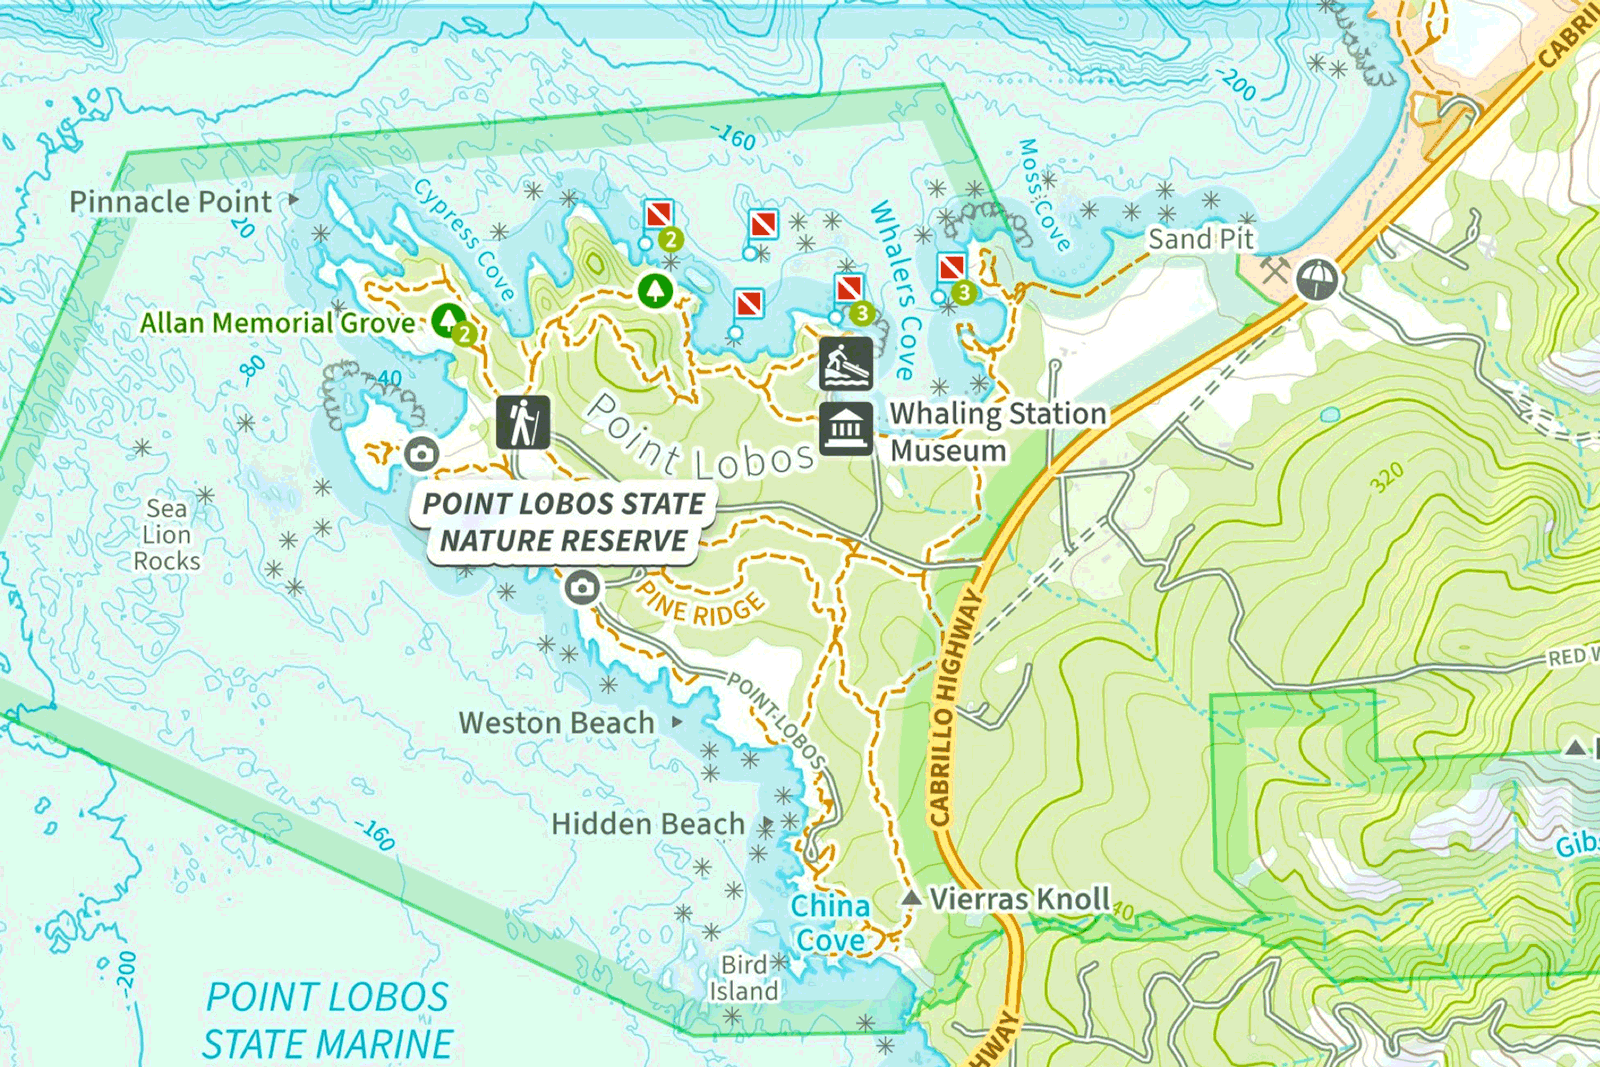 Alternating views of two maps of Monterey showing hiking trails